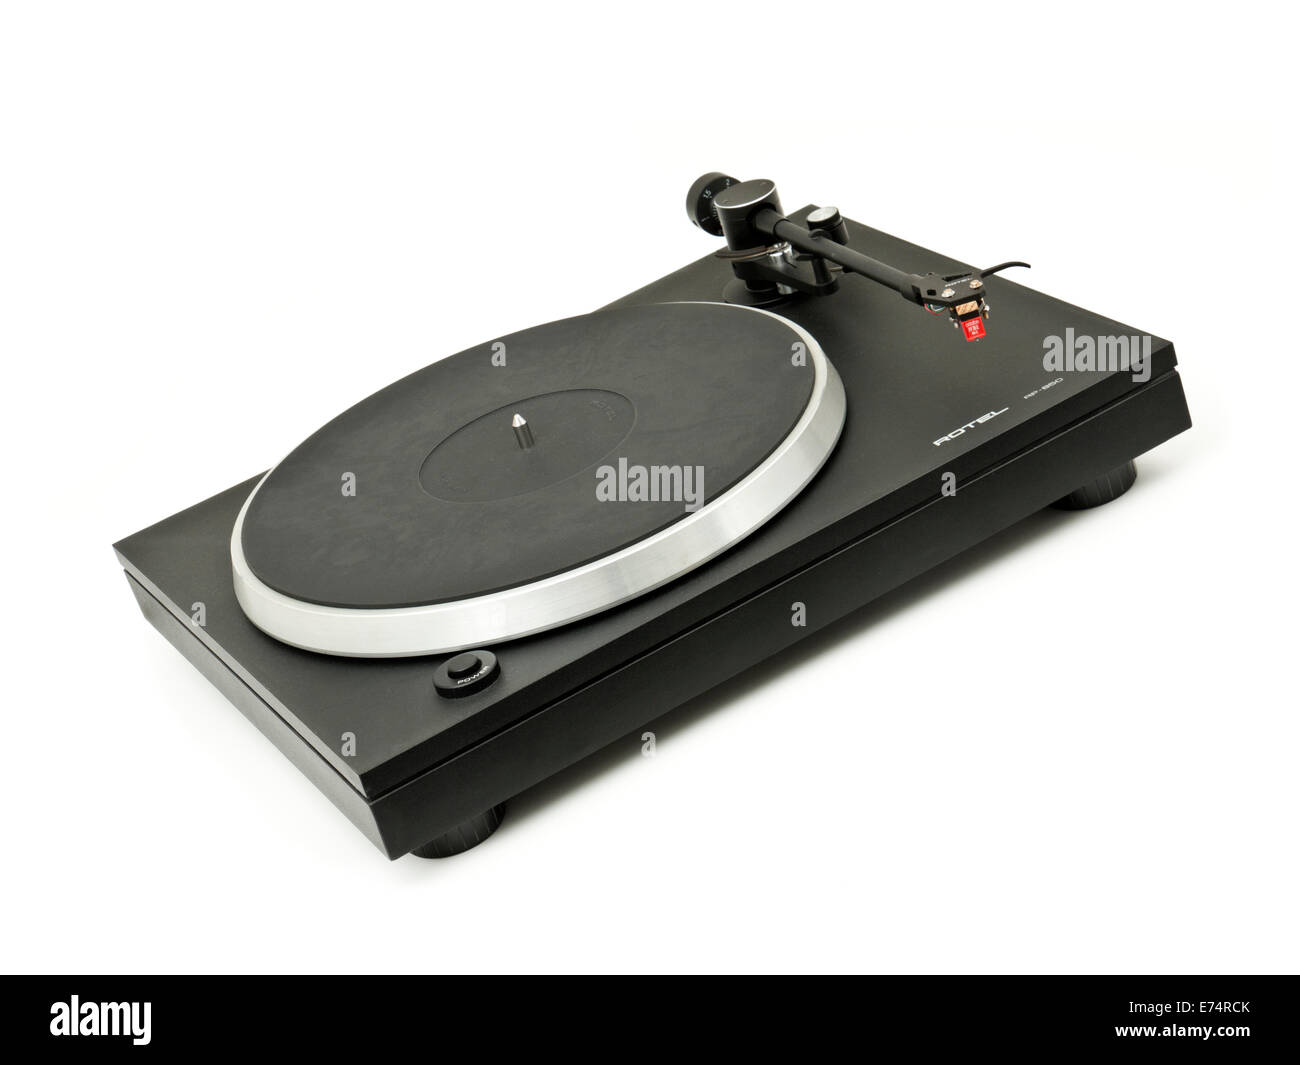 Vintage 1980's Rotel RP-850 belt-driven turntable for playing vinyl records, made in Japan. Stock Photo